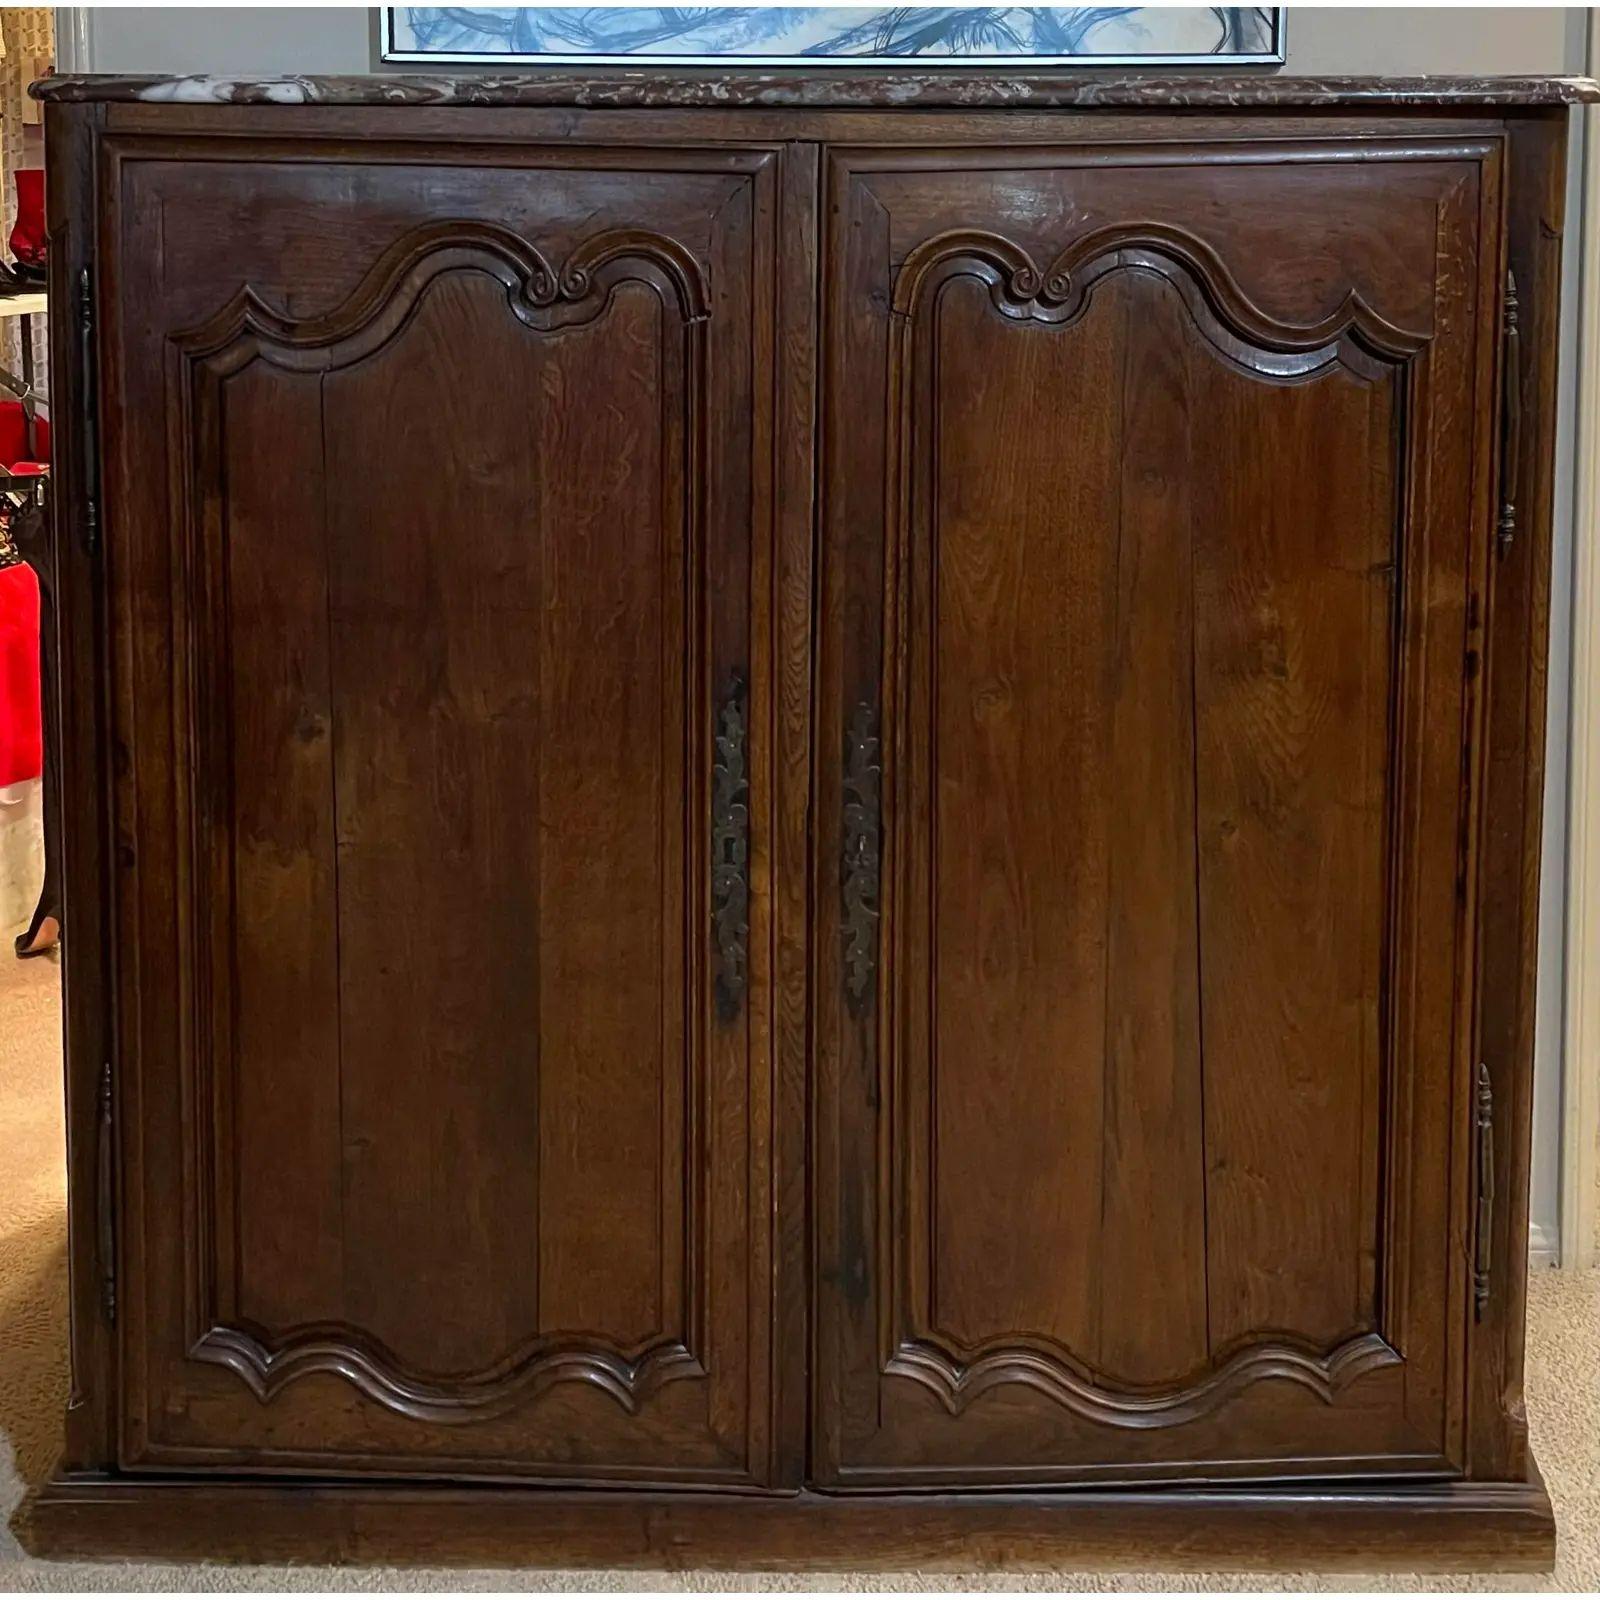 Antique 18th century French Provincial marble top wardrobe cupboard. It is a very unusual example in carved walnut with a marble to and customized interior with 12 drawers.

Additional information: 
Materials: Marble
Color: Brown
Period: 18th